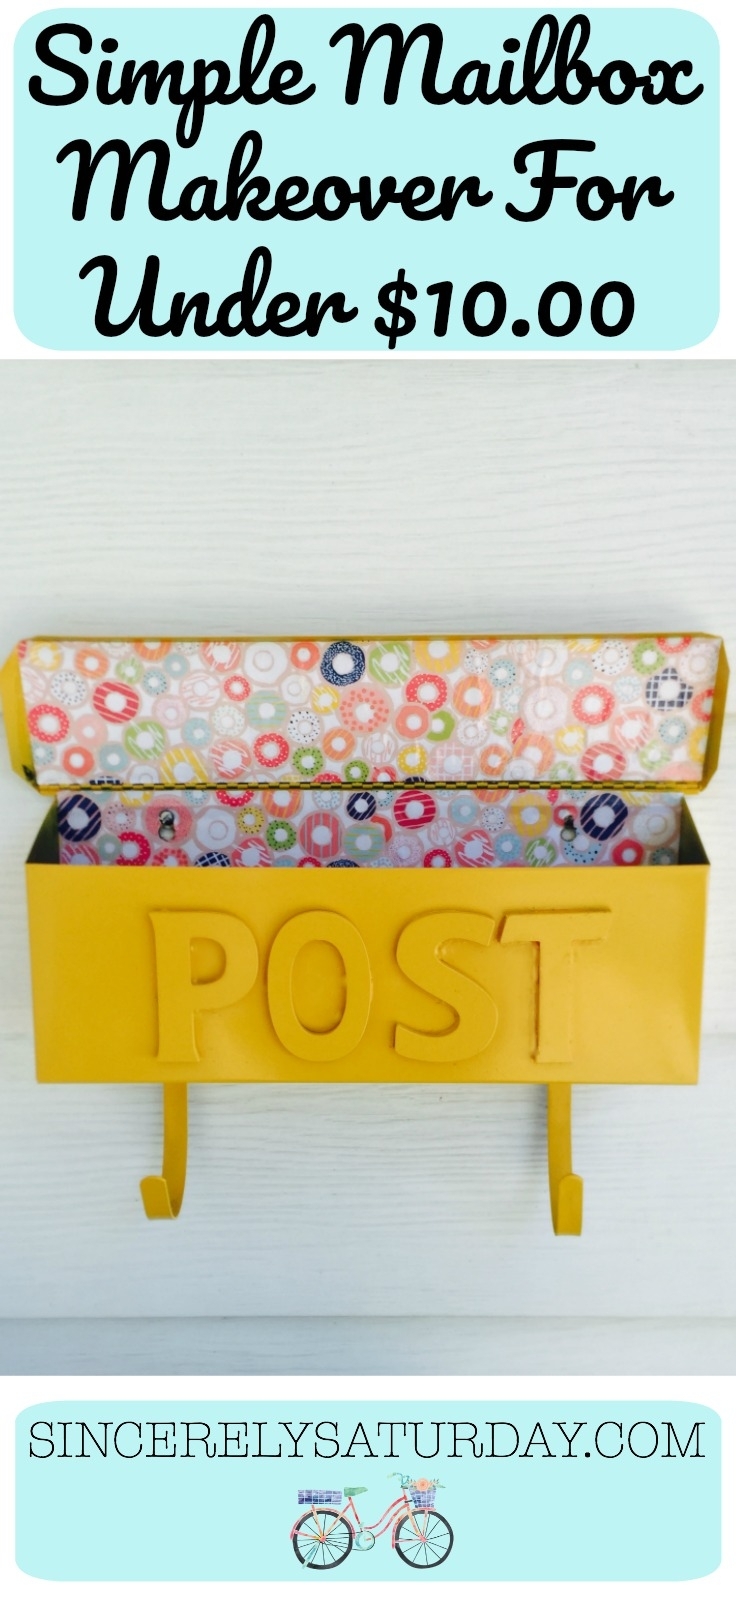 Simple mailbox makeover for under $10.00